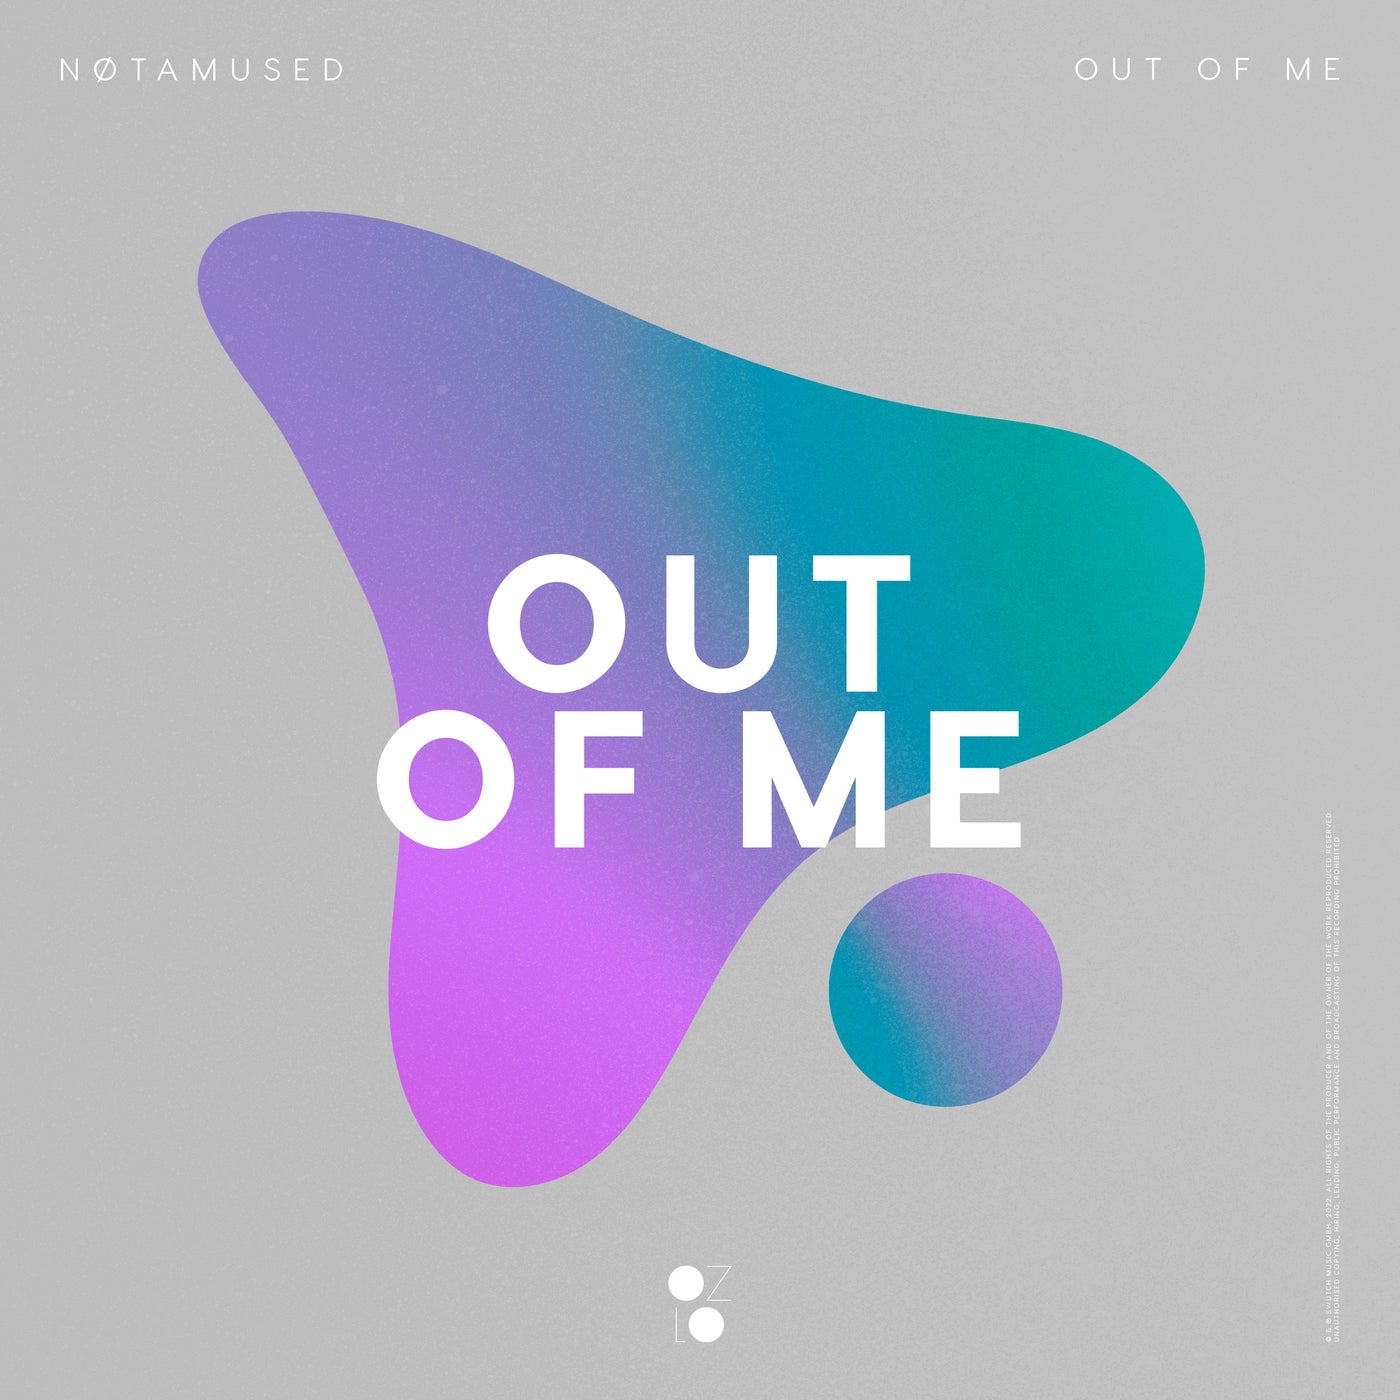 Out of Me